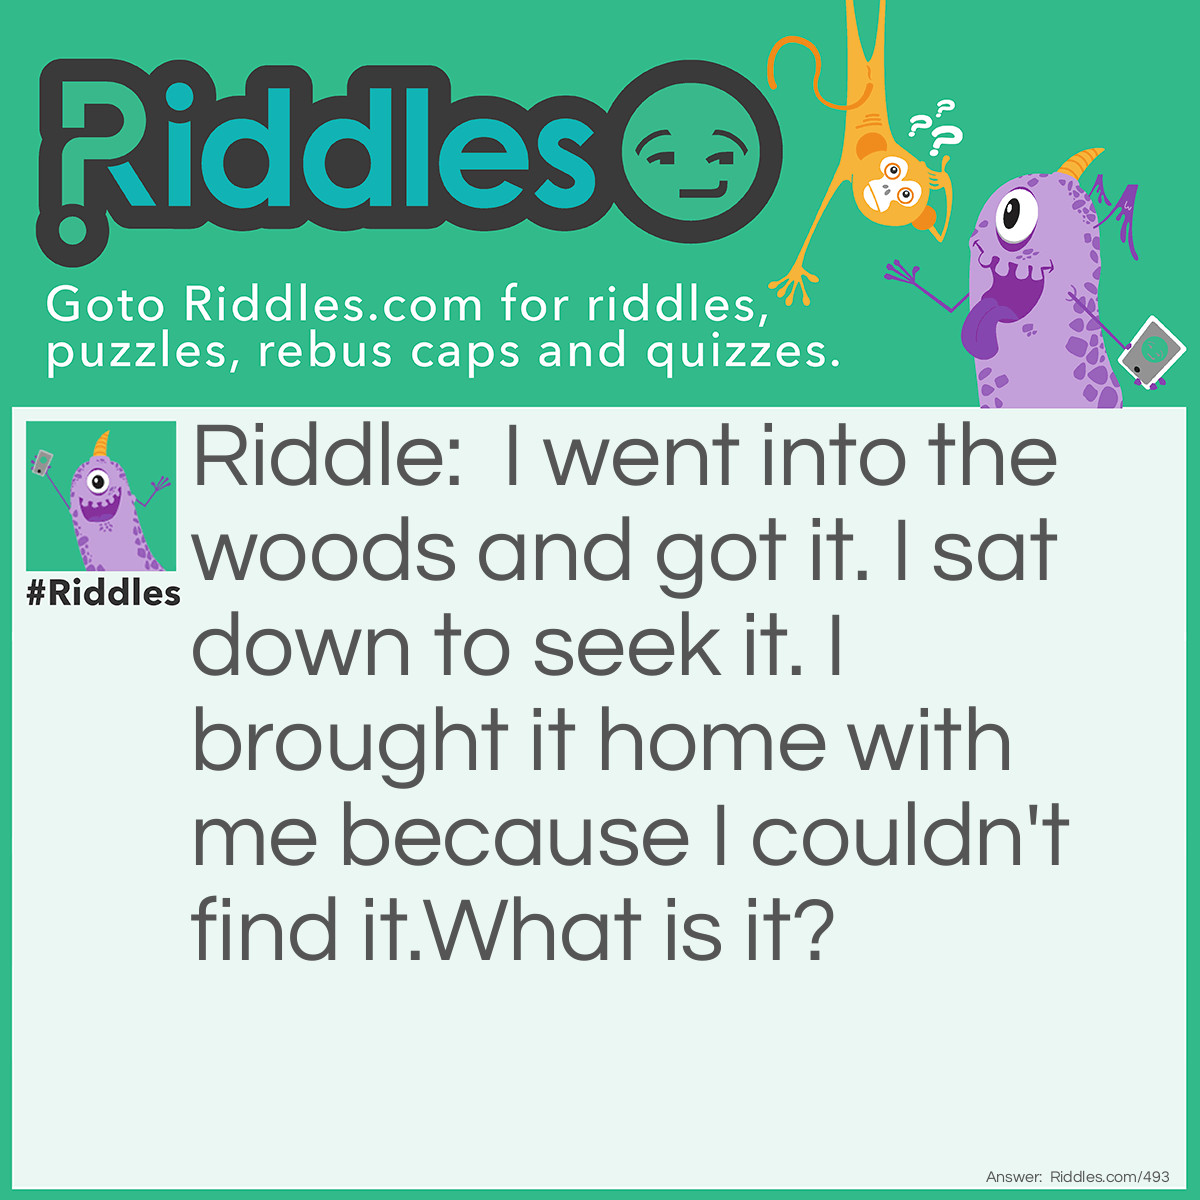 Riddle: I went into the woods and got it. I sat down to seek it. I brought it home with me because I couldn't find it.
What is it? Answer: A splinter.